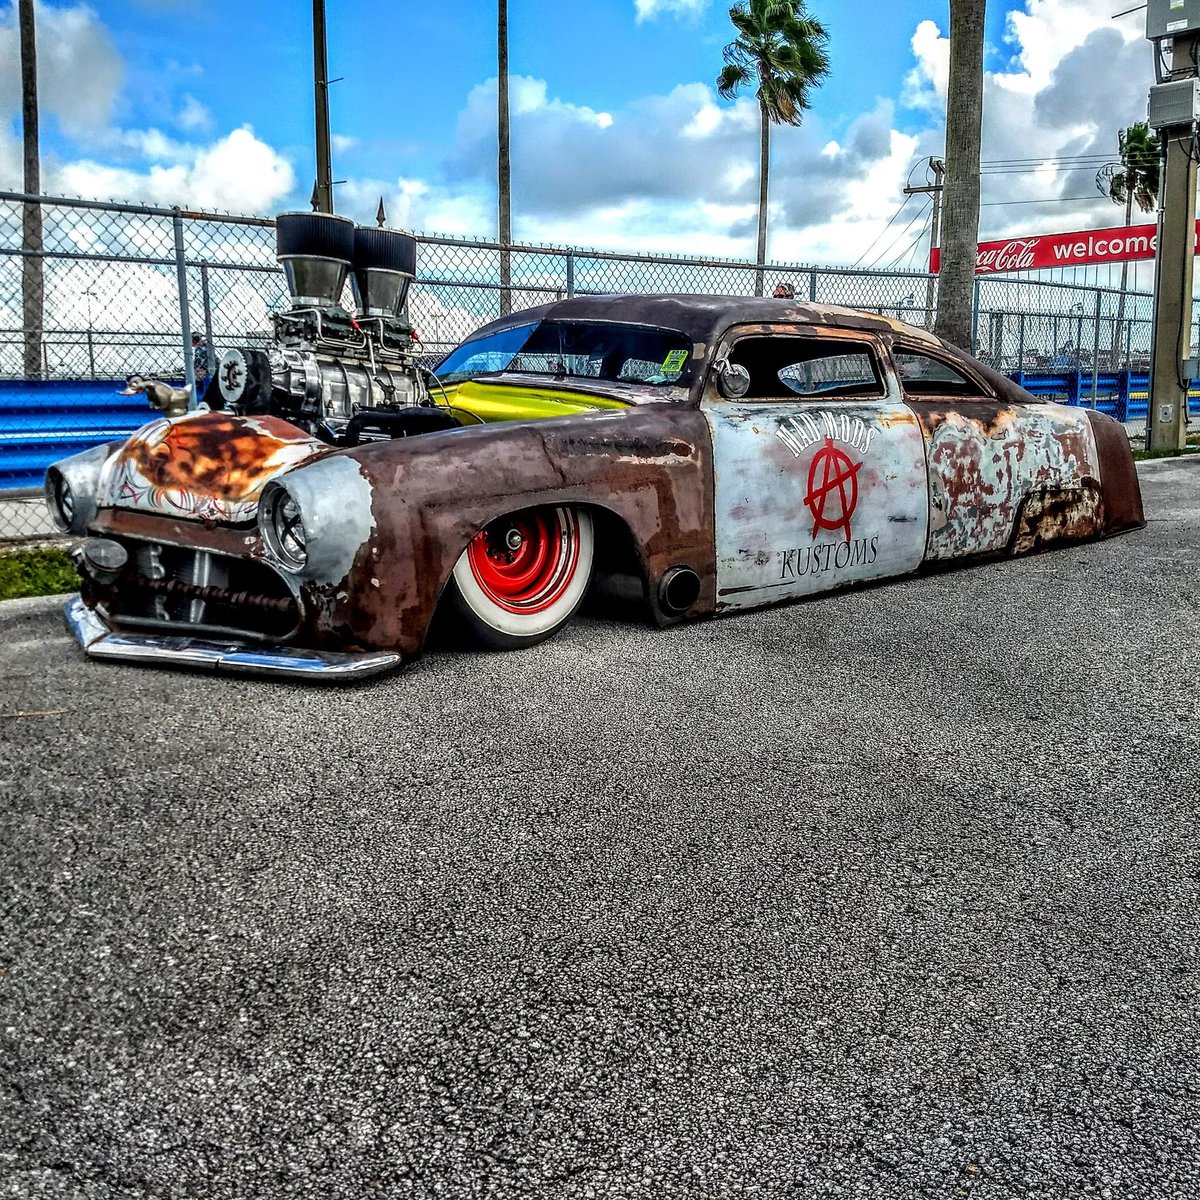 Yeah he's got the Madness 😎
#getthemadness #ratrod #ratical #rust #slammed